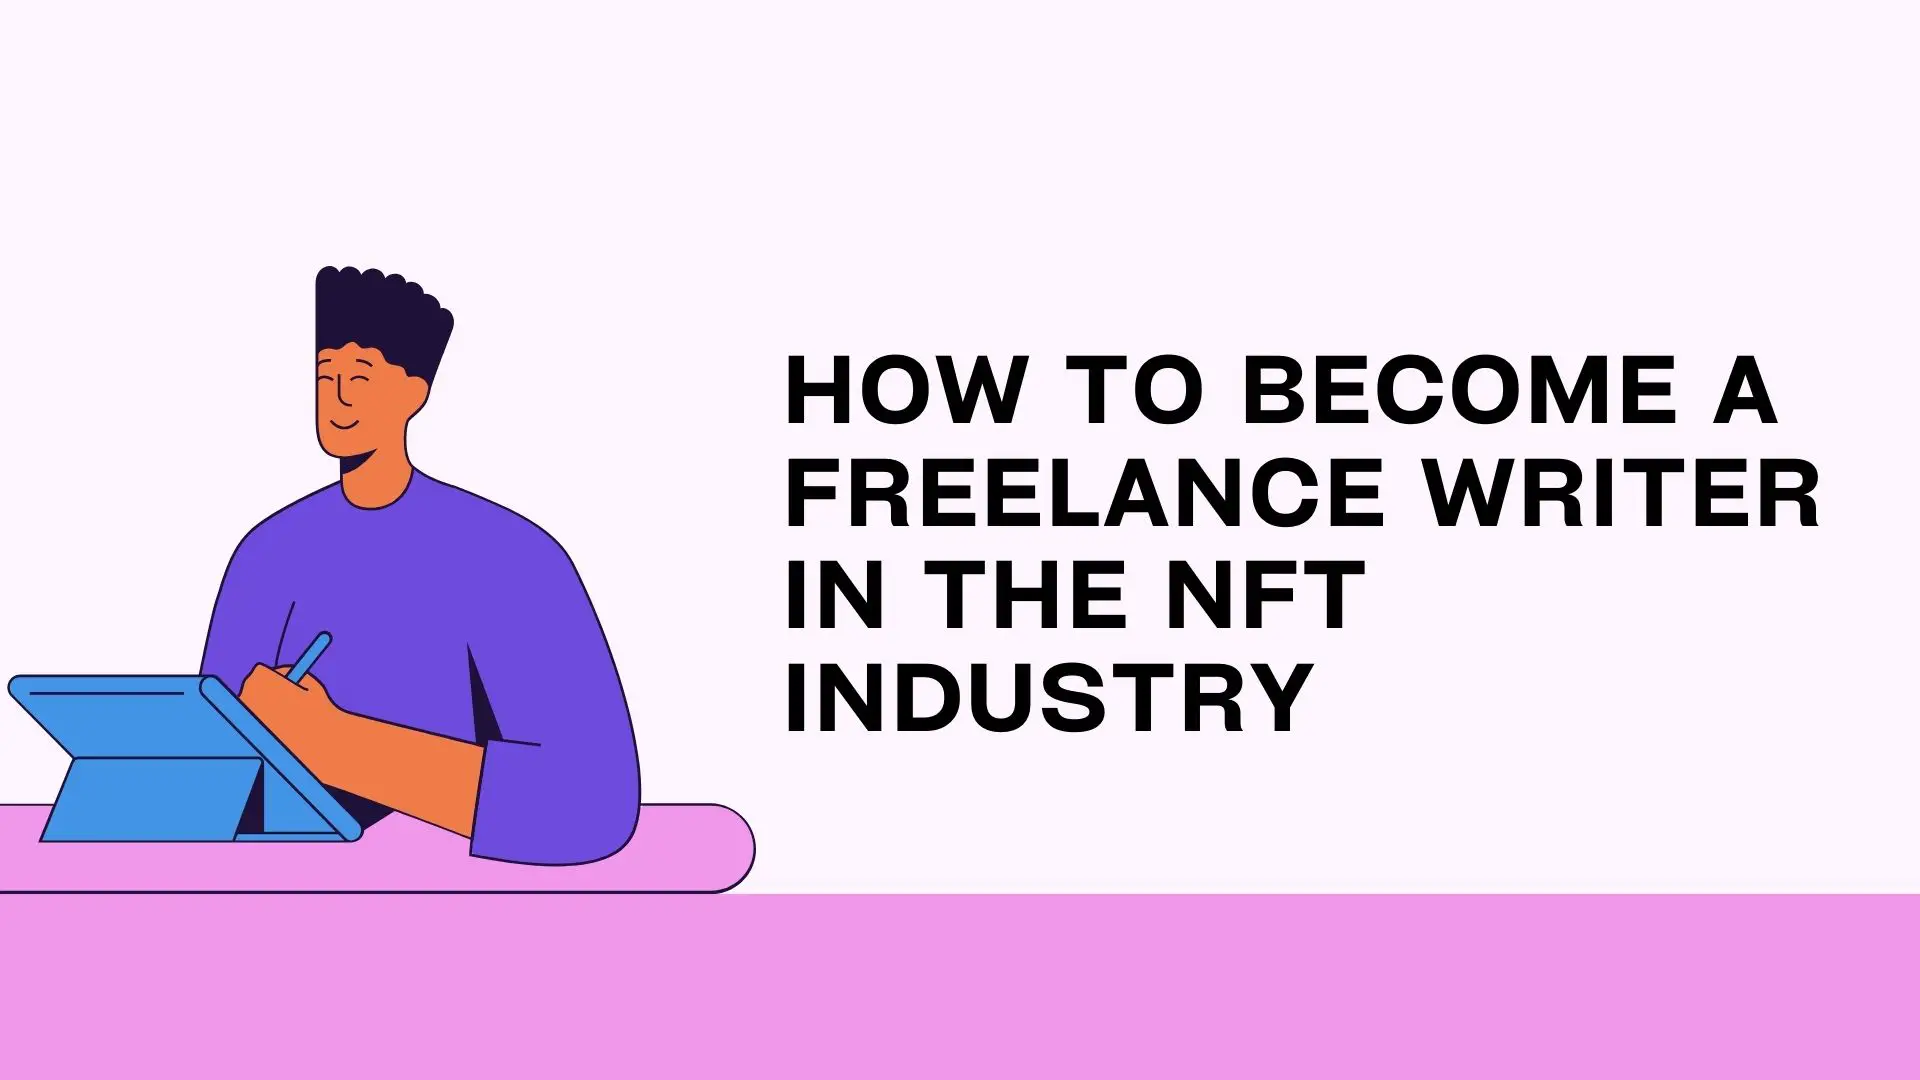 How To Become A Freelance Writer In The NFT Industry